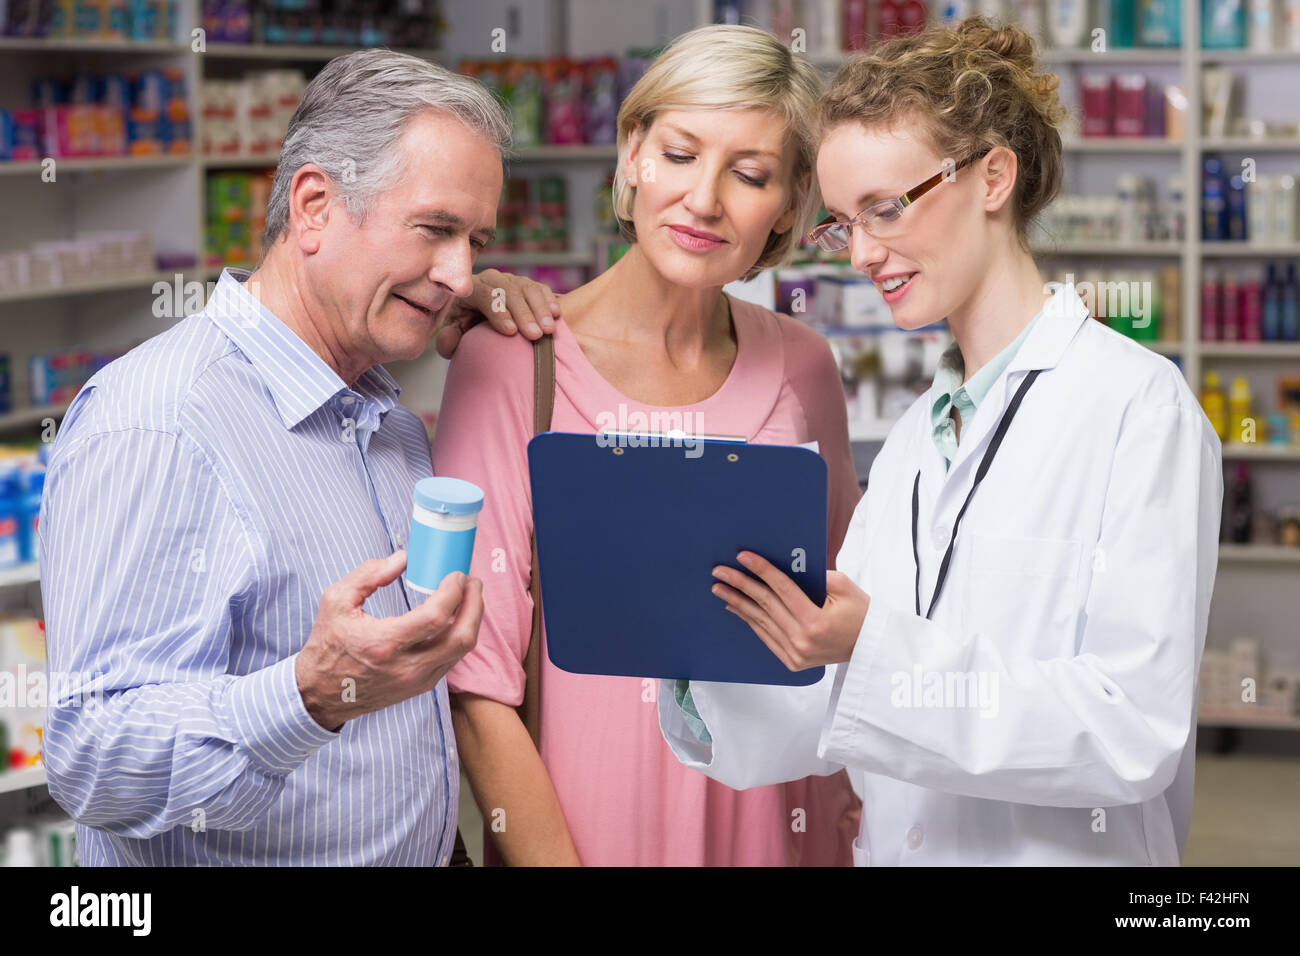 Pharmacist showing clipboard to costumers Stock Photo